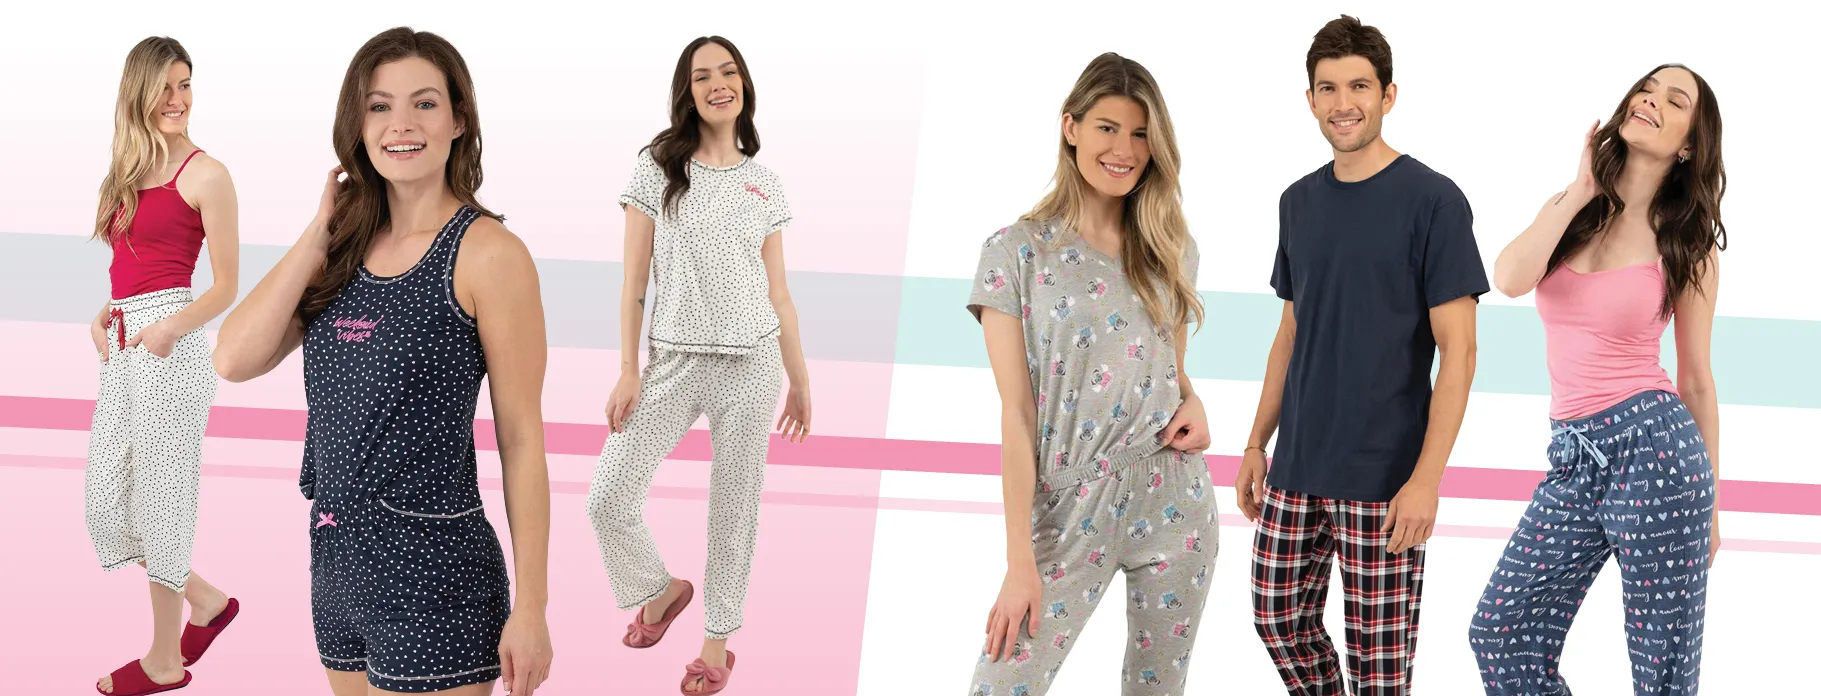 Cozy up together: PJs for lazy Sundays and movie marathons!